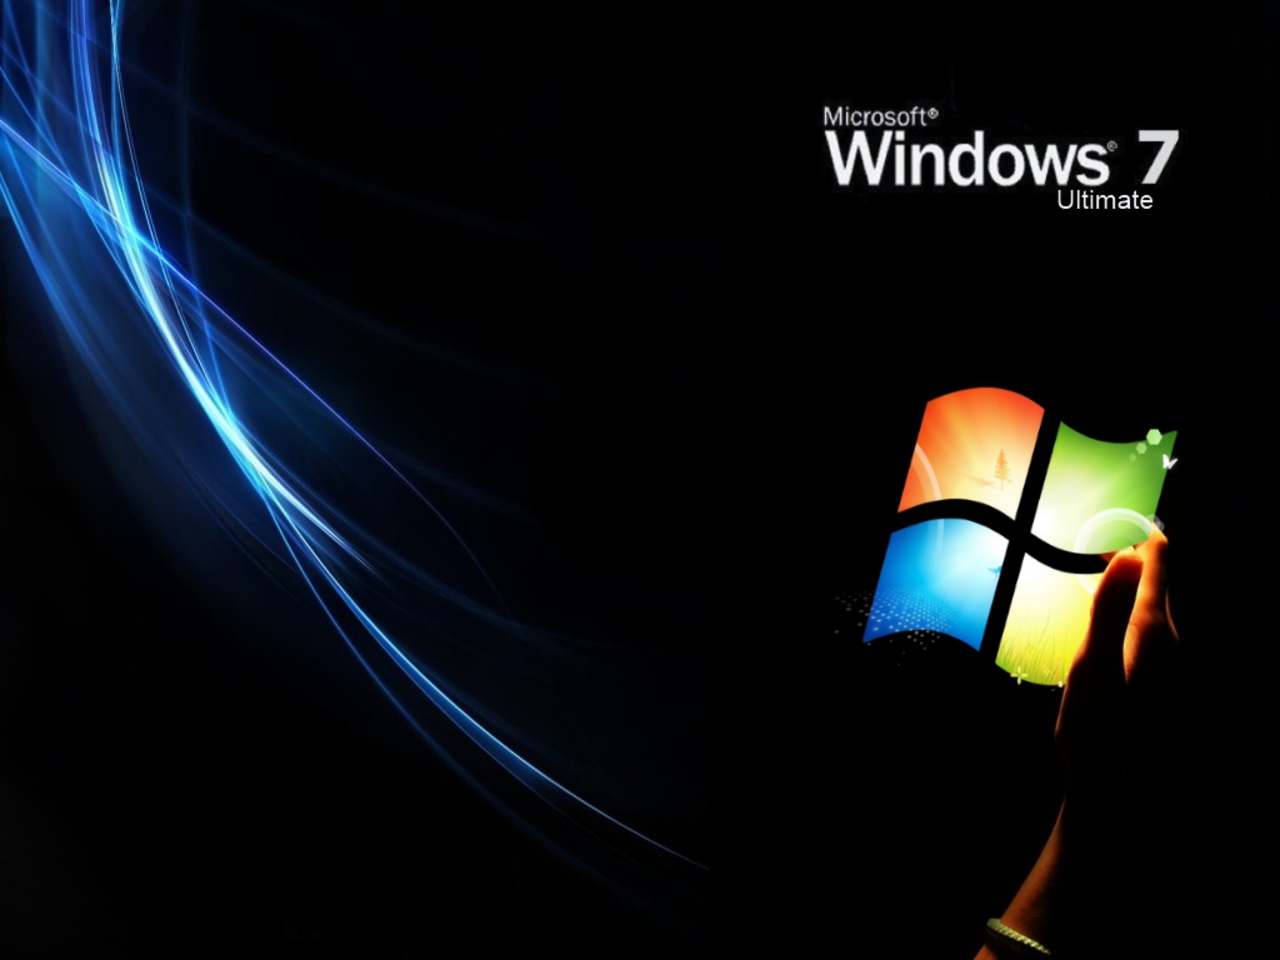 By Stephen Ments Off On HD Wallpaper For Windows Ultimate